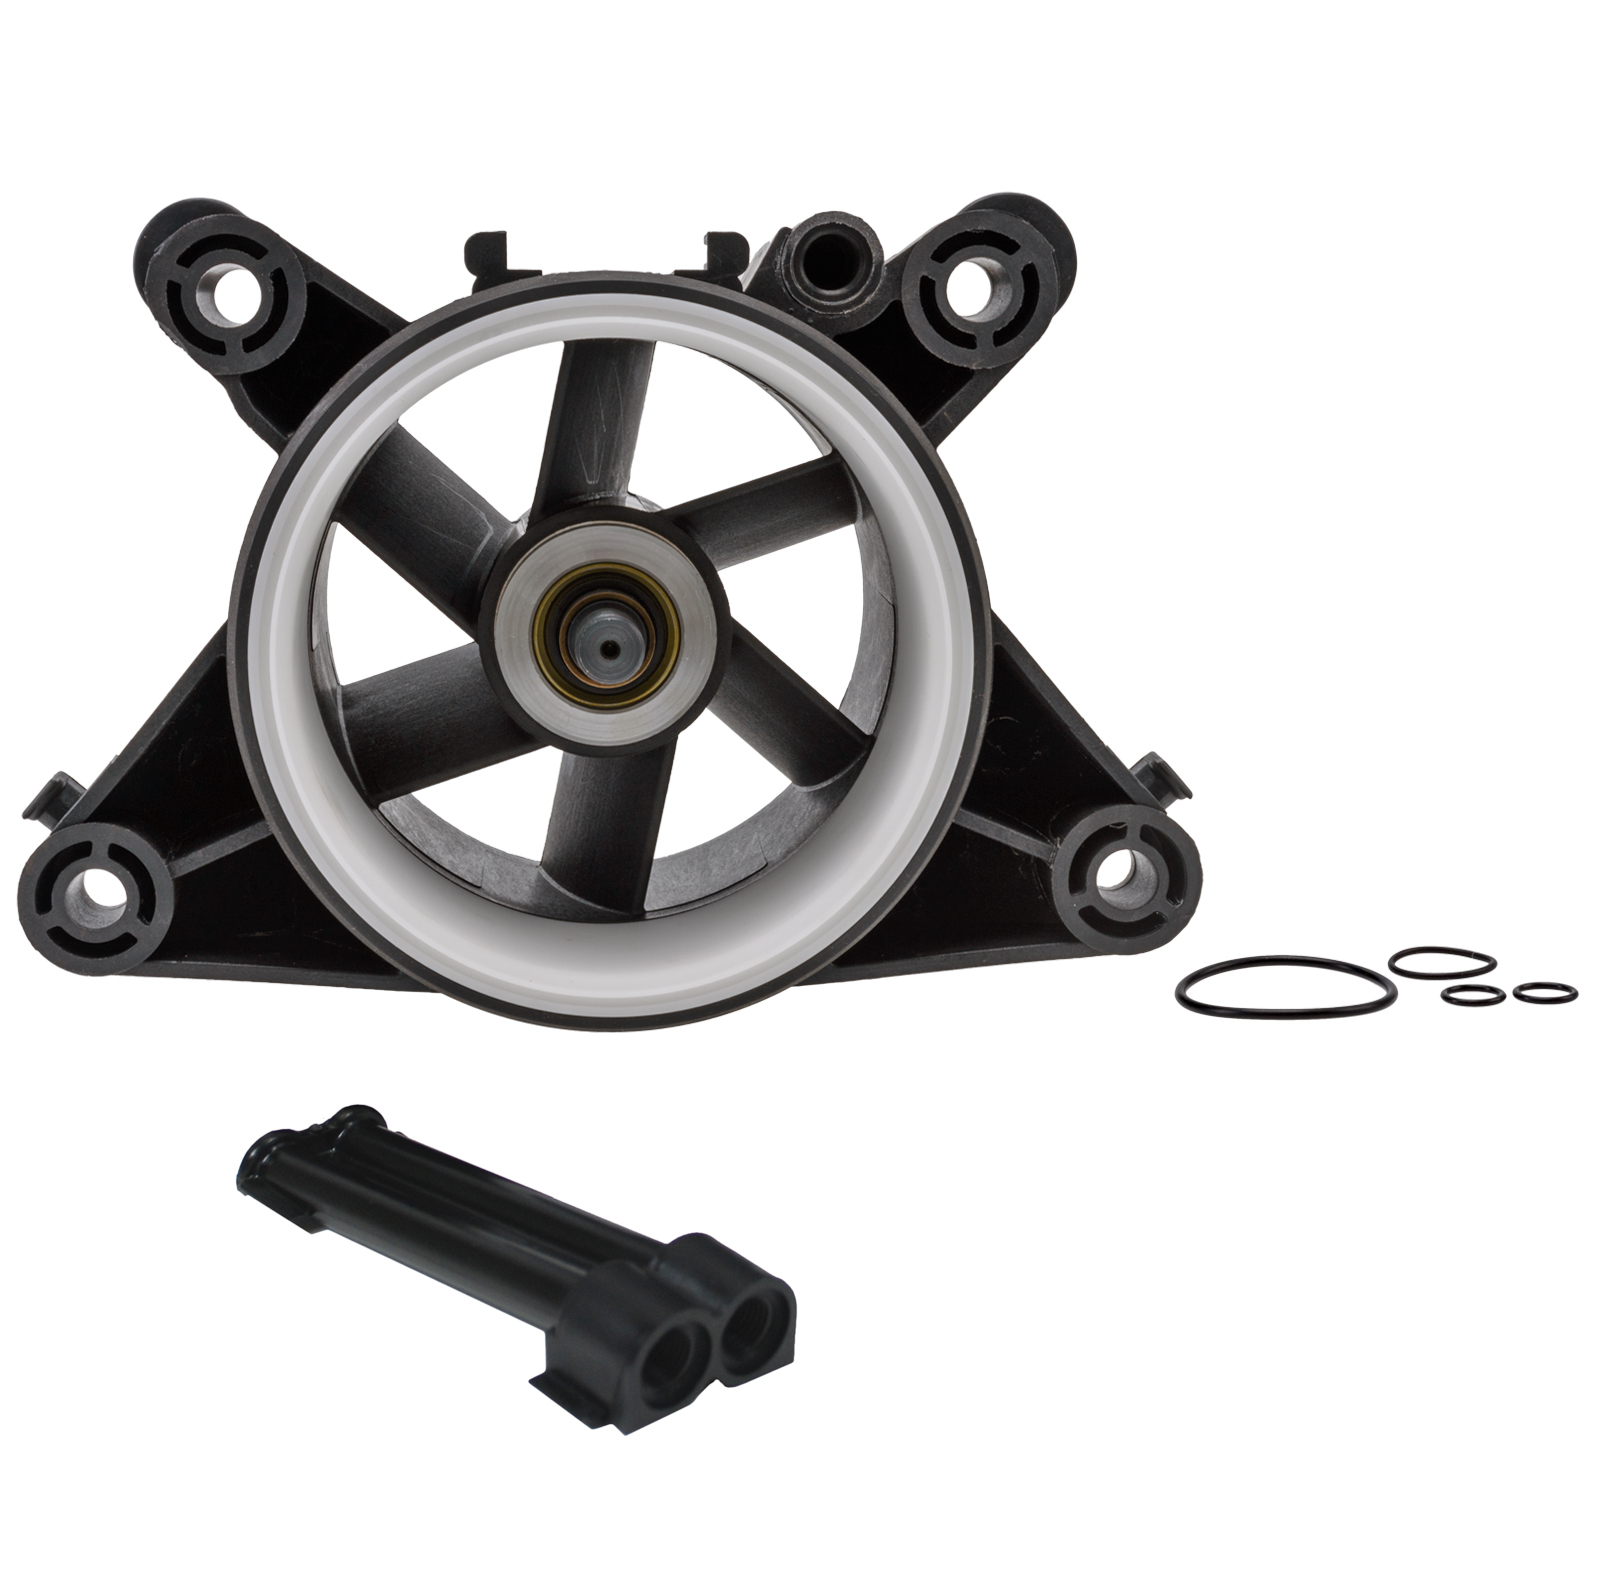 Details about   Top End Kit For 1992 Sea-Doo GTX Personal Watercraft WSM 010-815-22